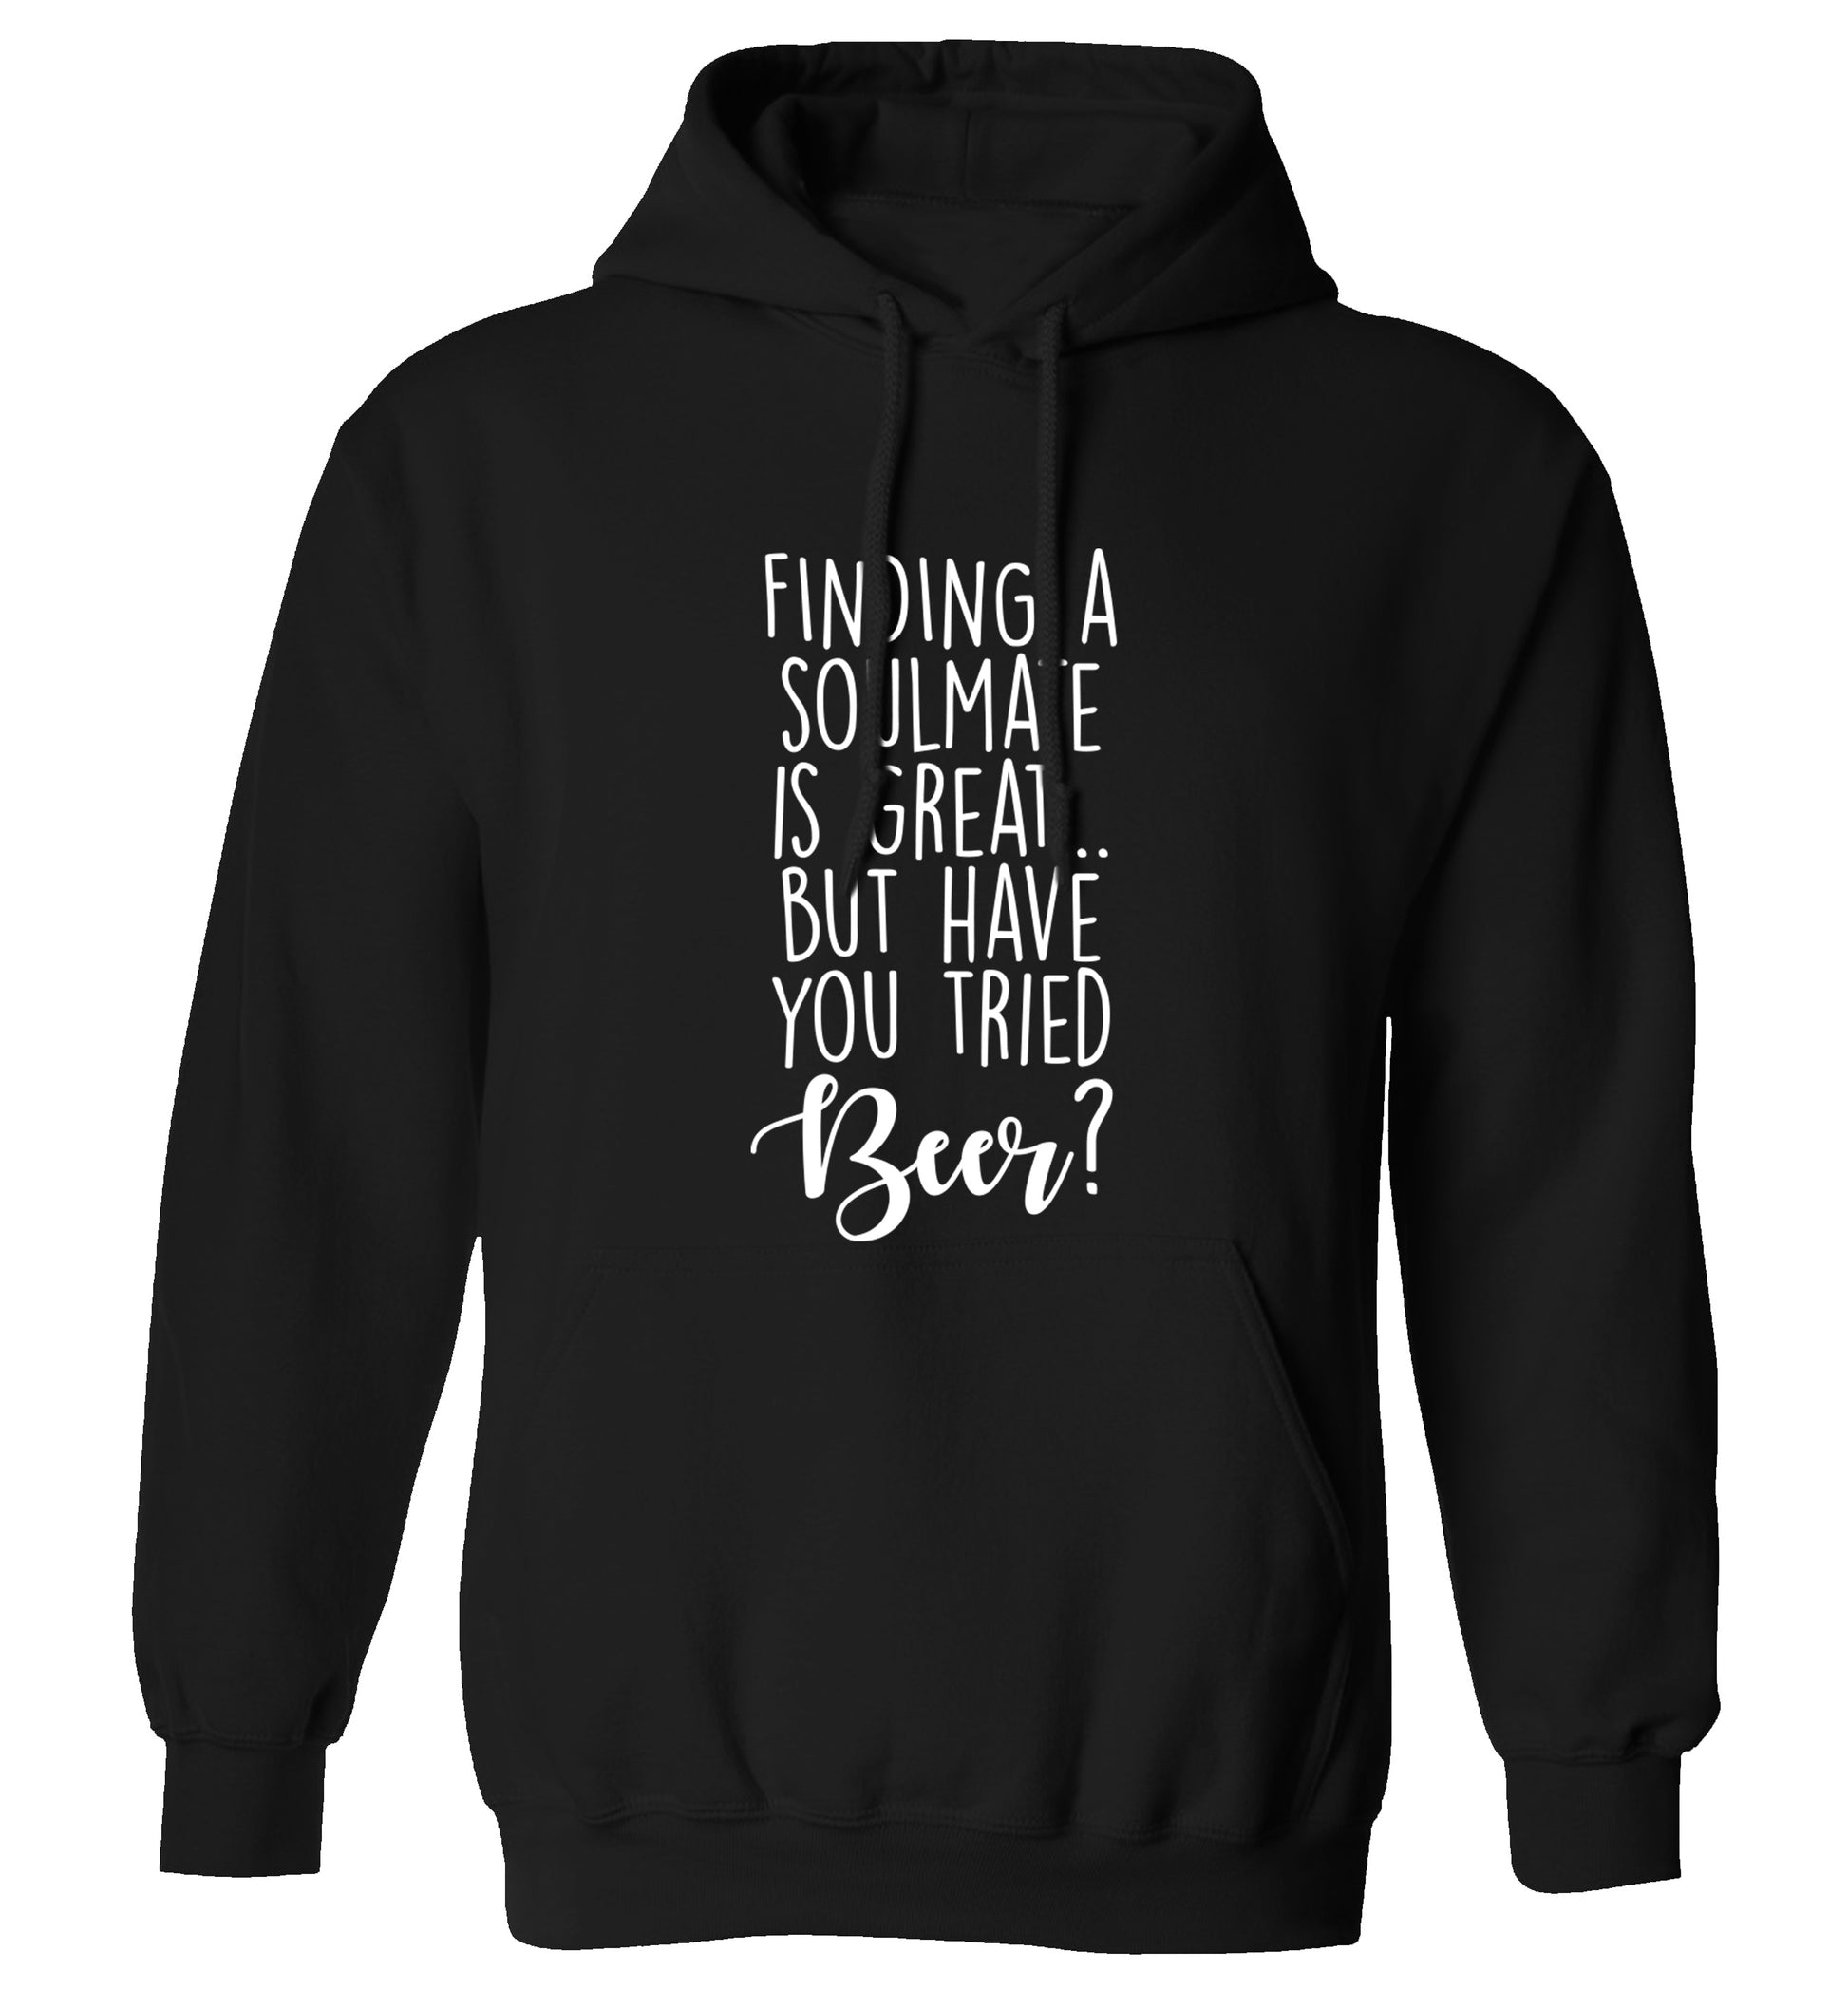 Finding a soulmate is great but have you tried beer? adults unisex black hoodie 2XL